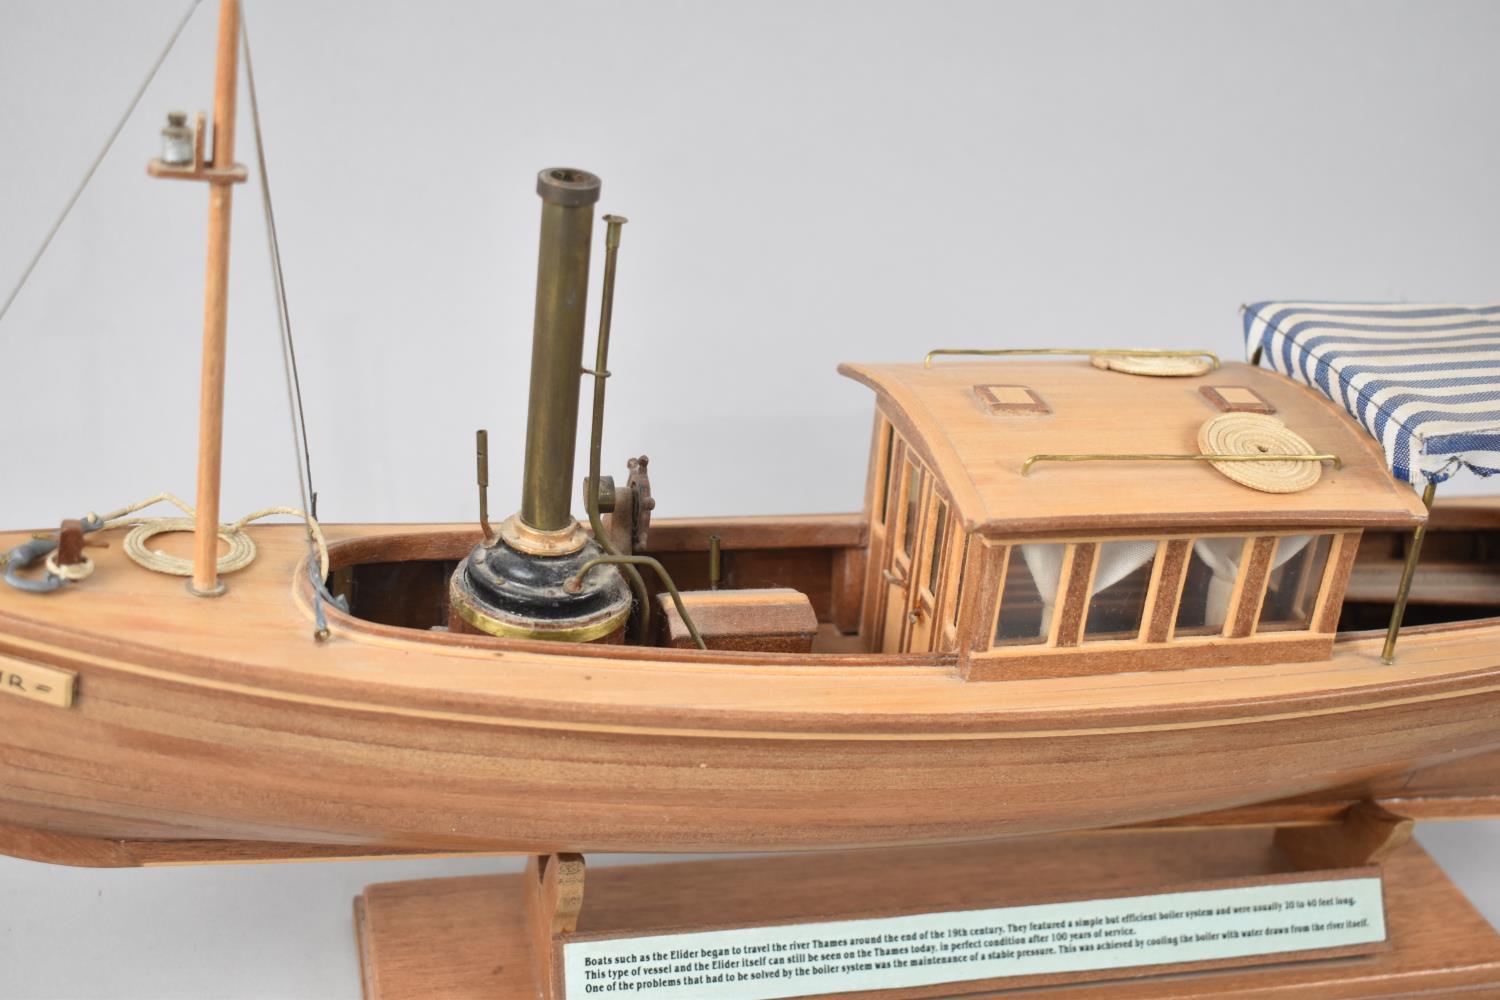 A Nicely Detailed Model of Steamed Powered Riverboat, The Elidir, 45cms Long and Also a Wooden Model - Image 2 of 2